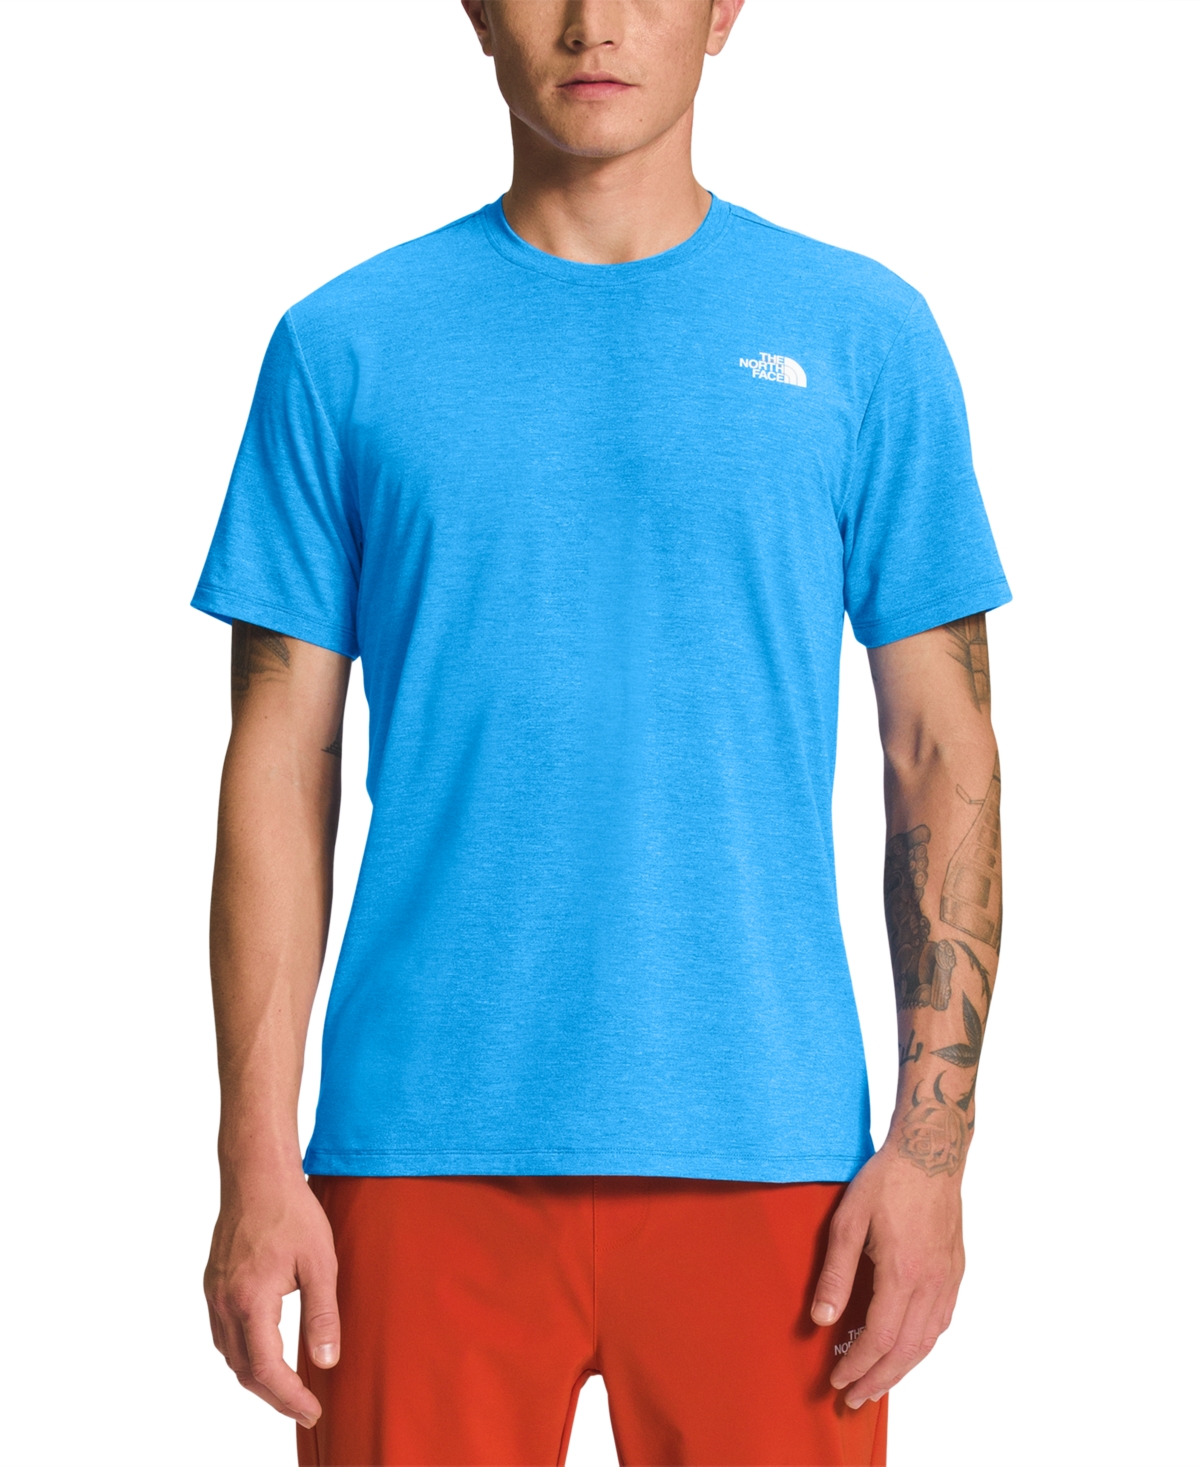 THE NORTH FACE MEN'S WANDER PERFORMANCE T-SHIRT